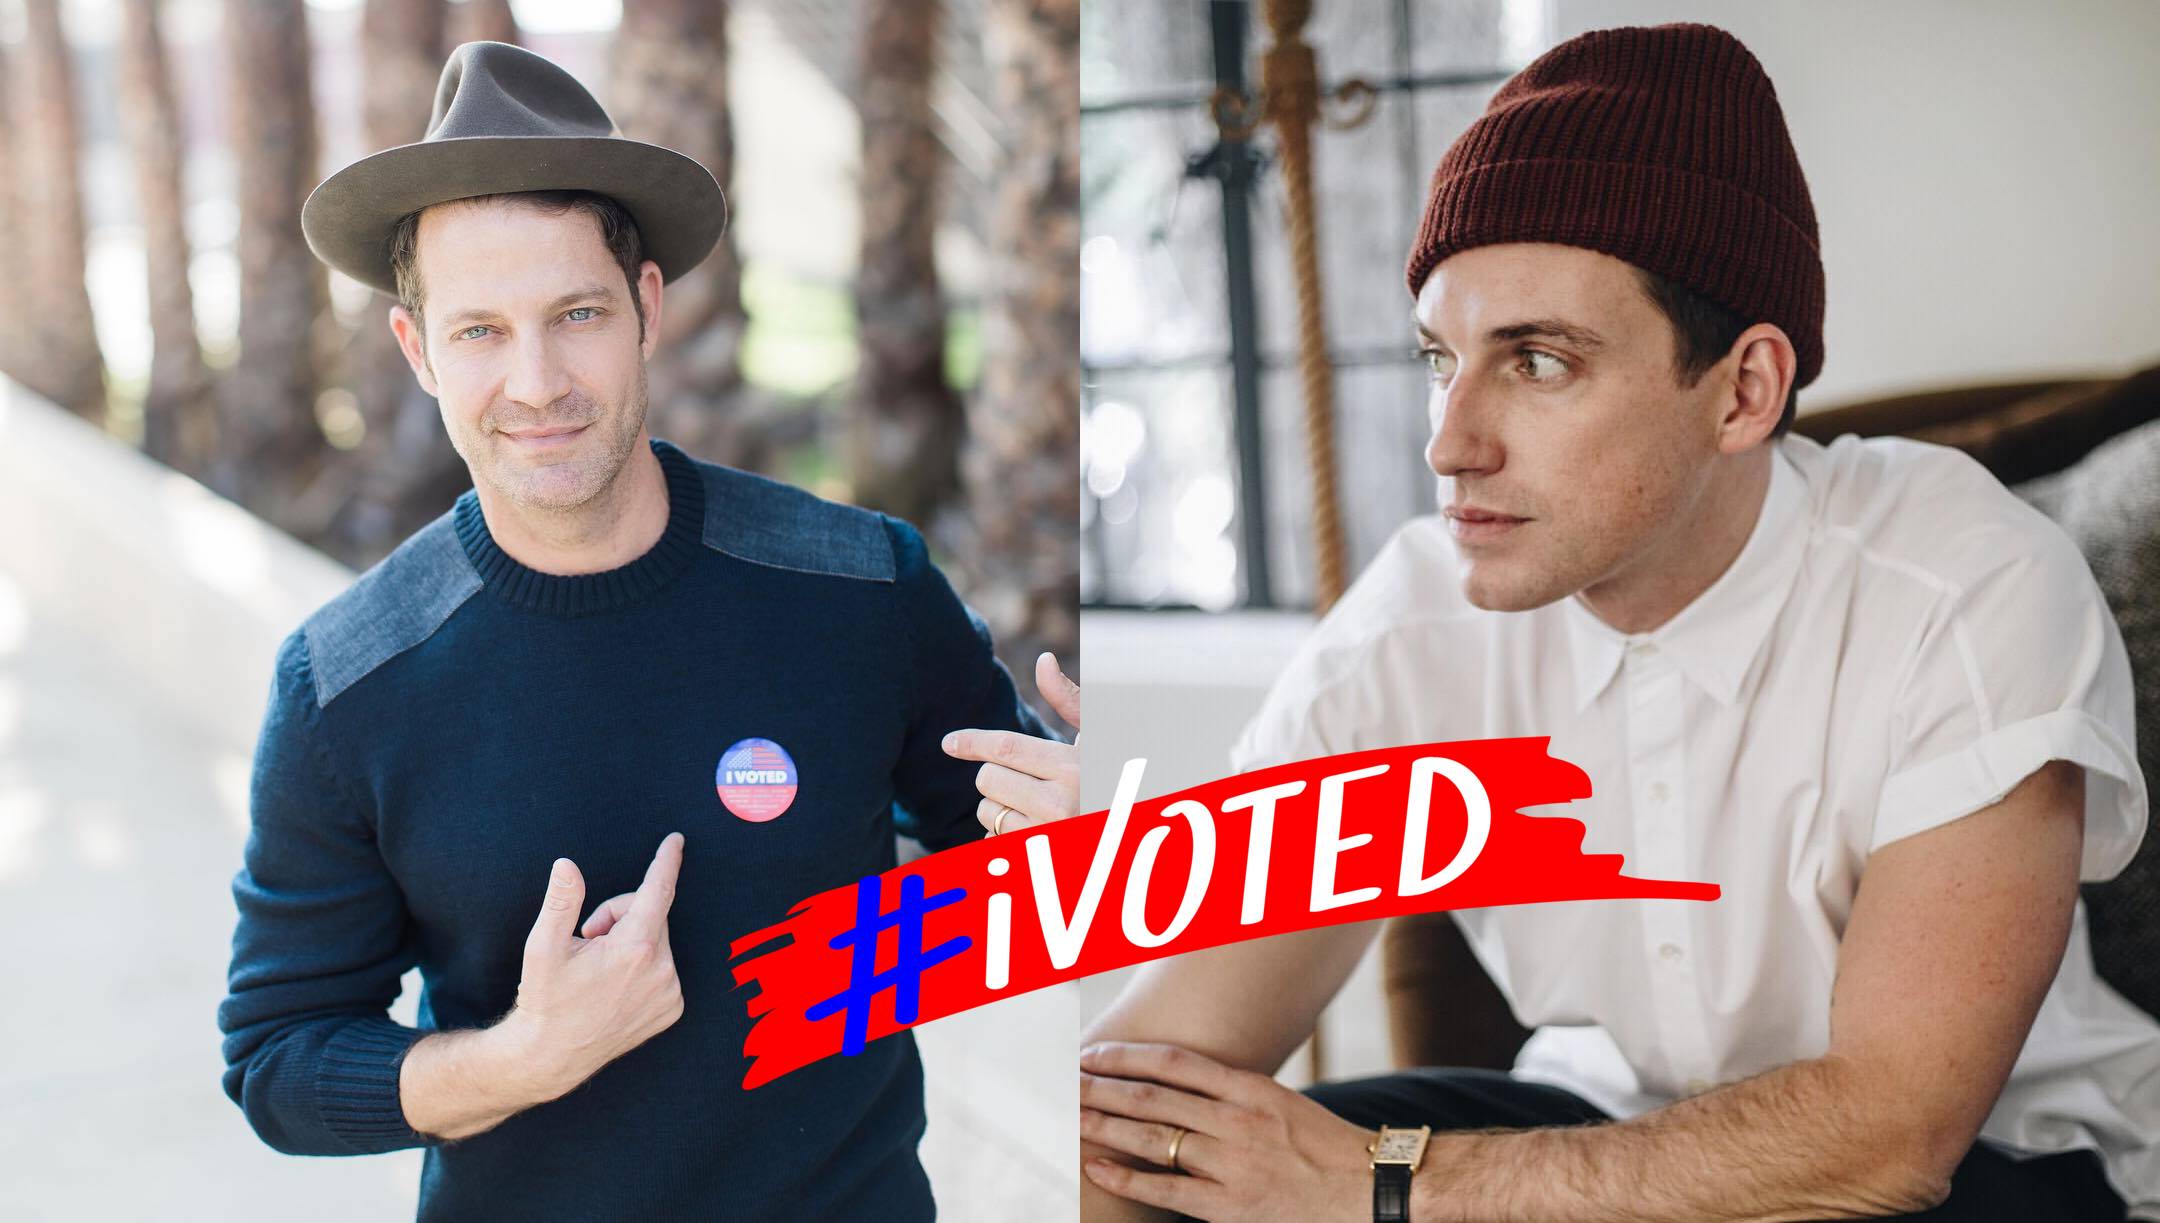 You are currently viewing Register to Vote Nate and Jeremiah About #IAmAVoter